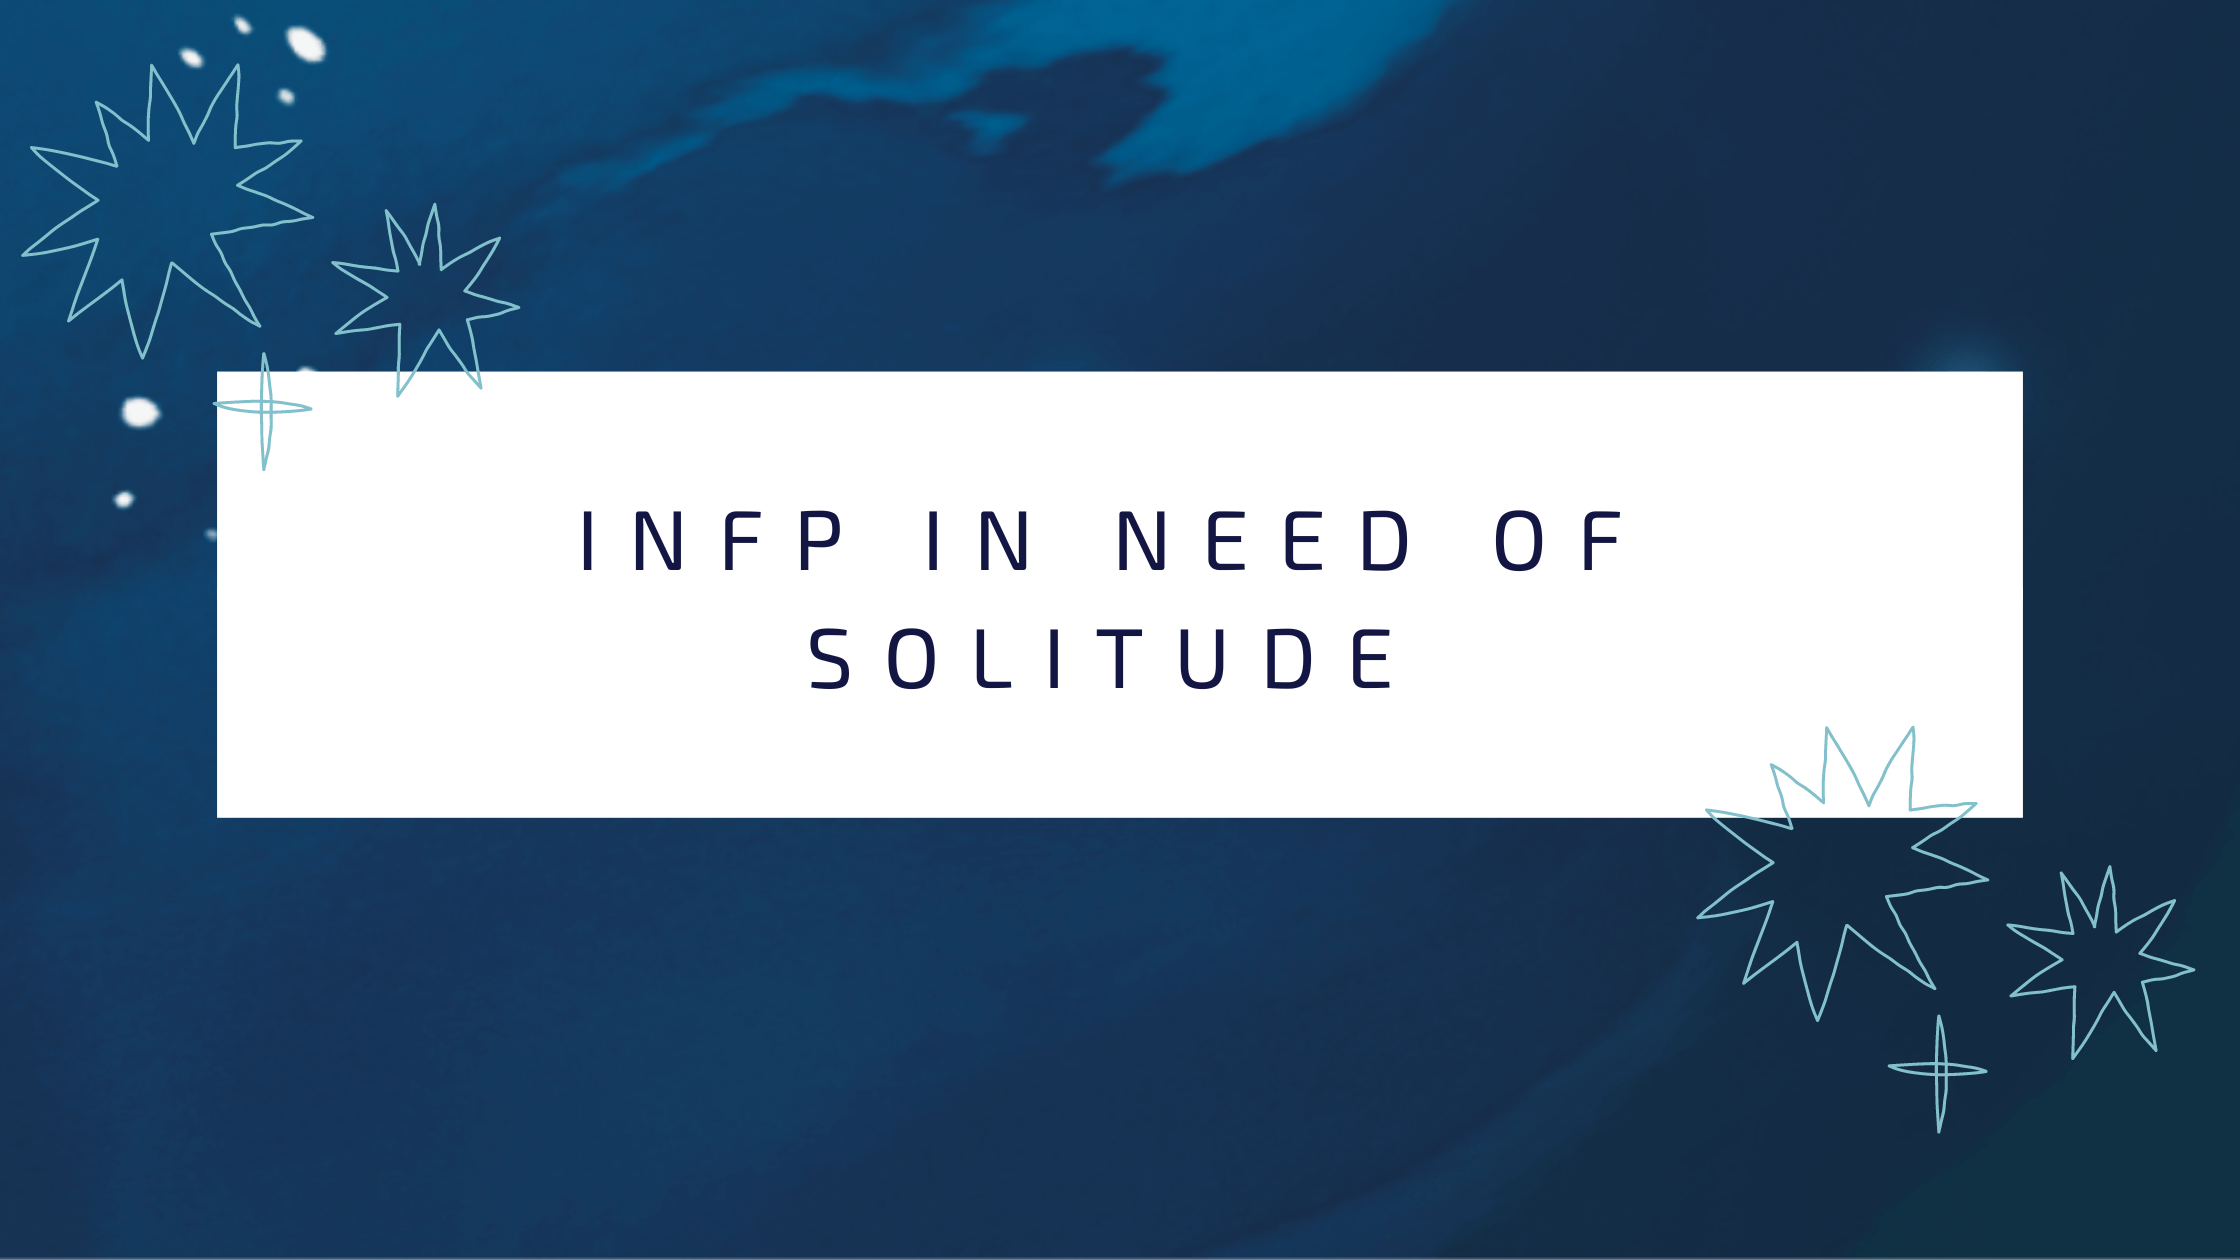 INFP in need of solitude